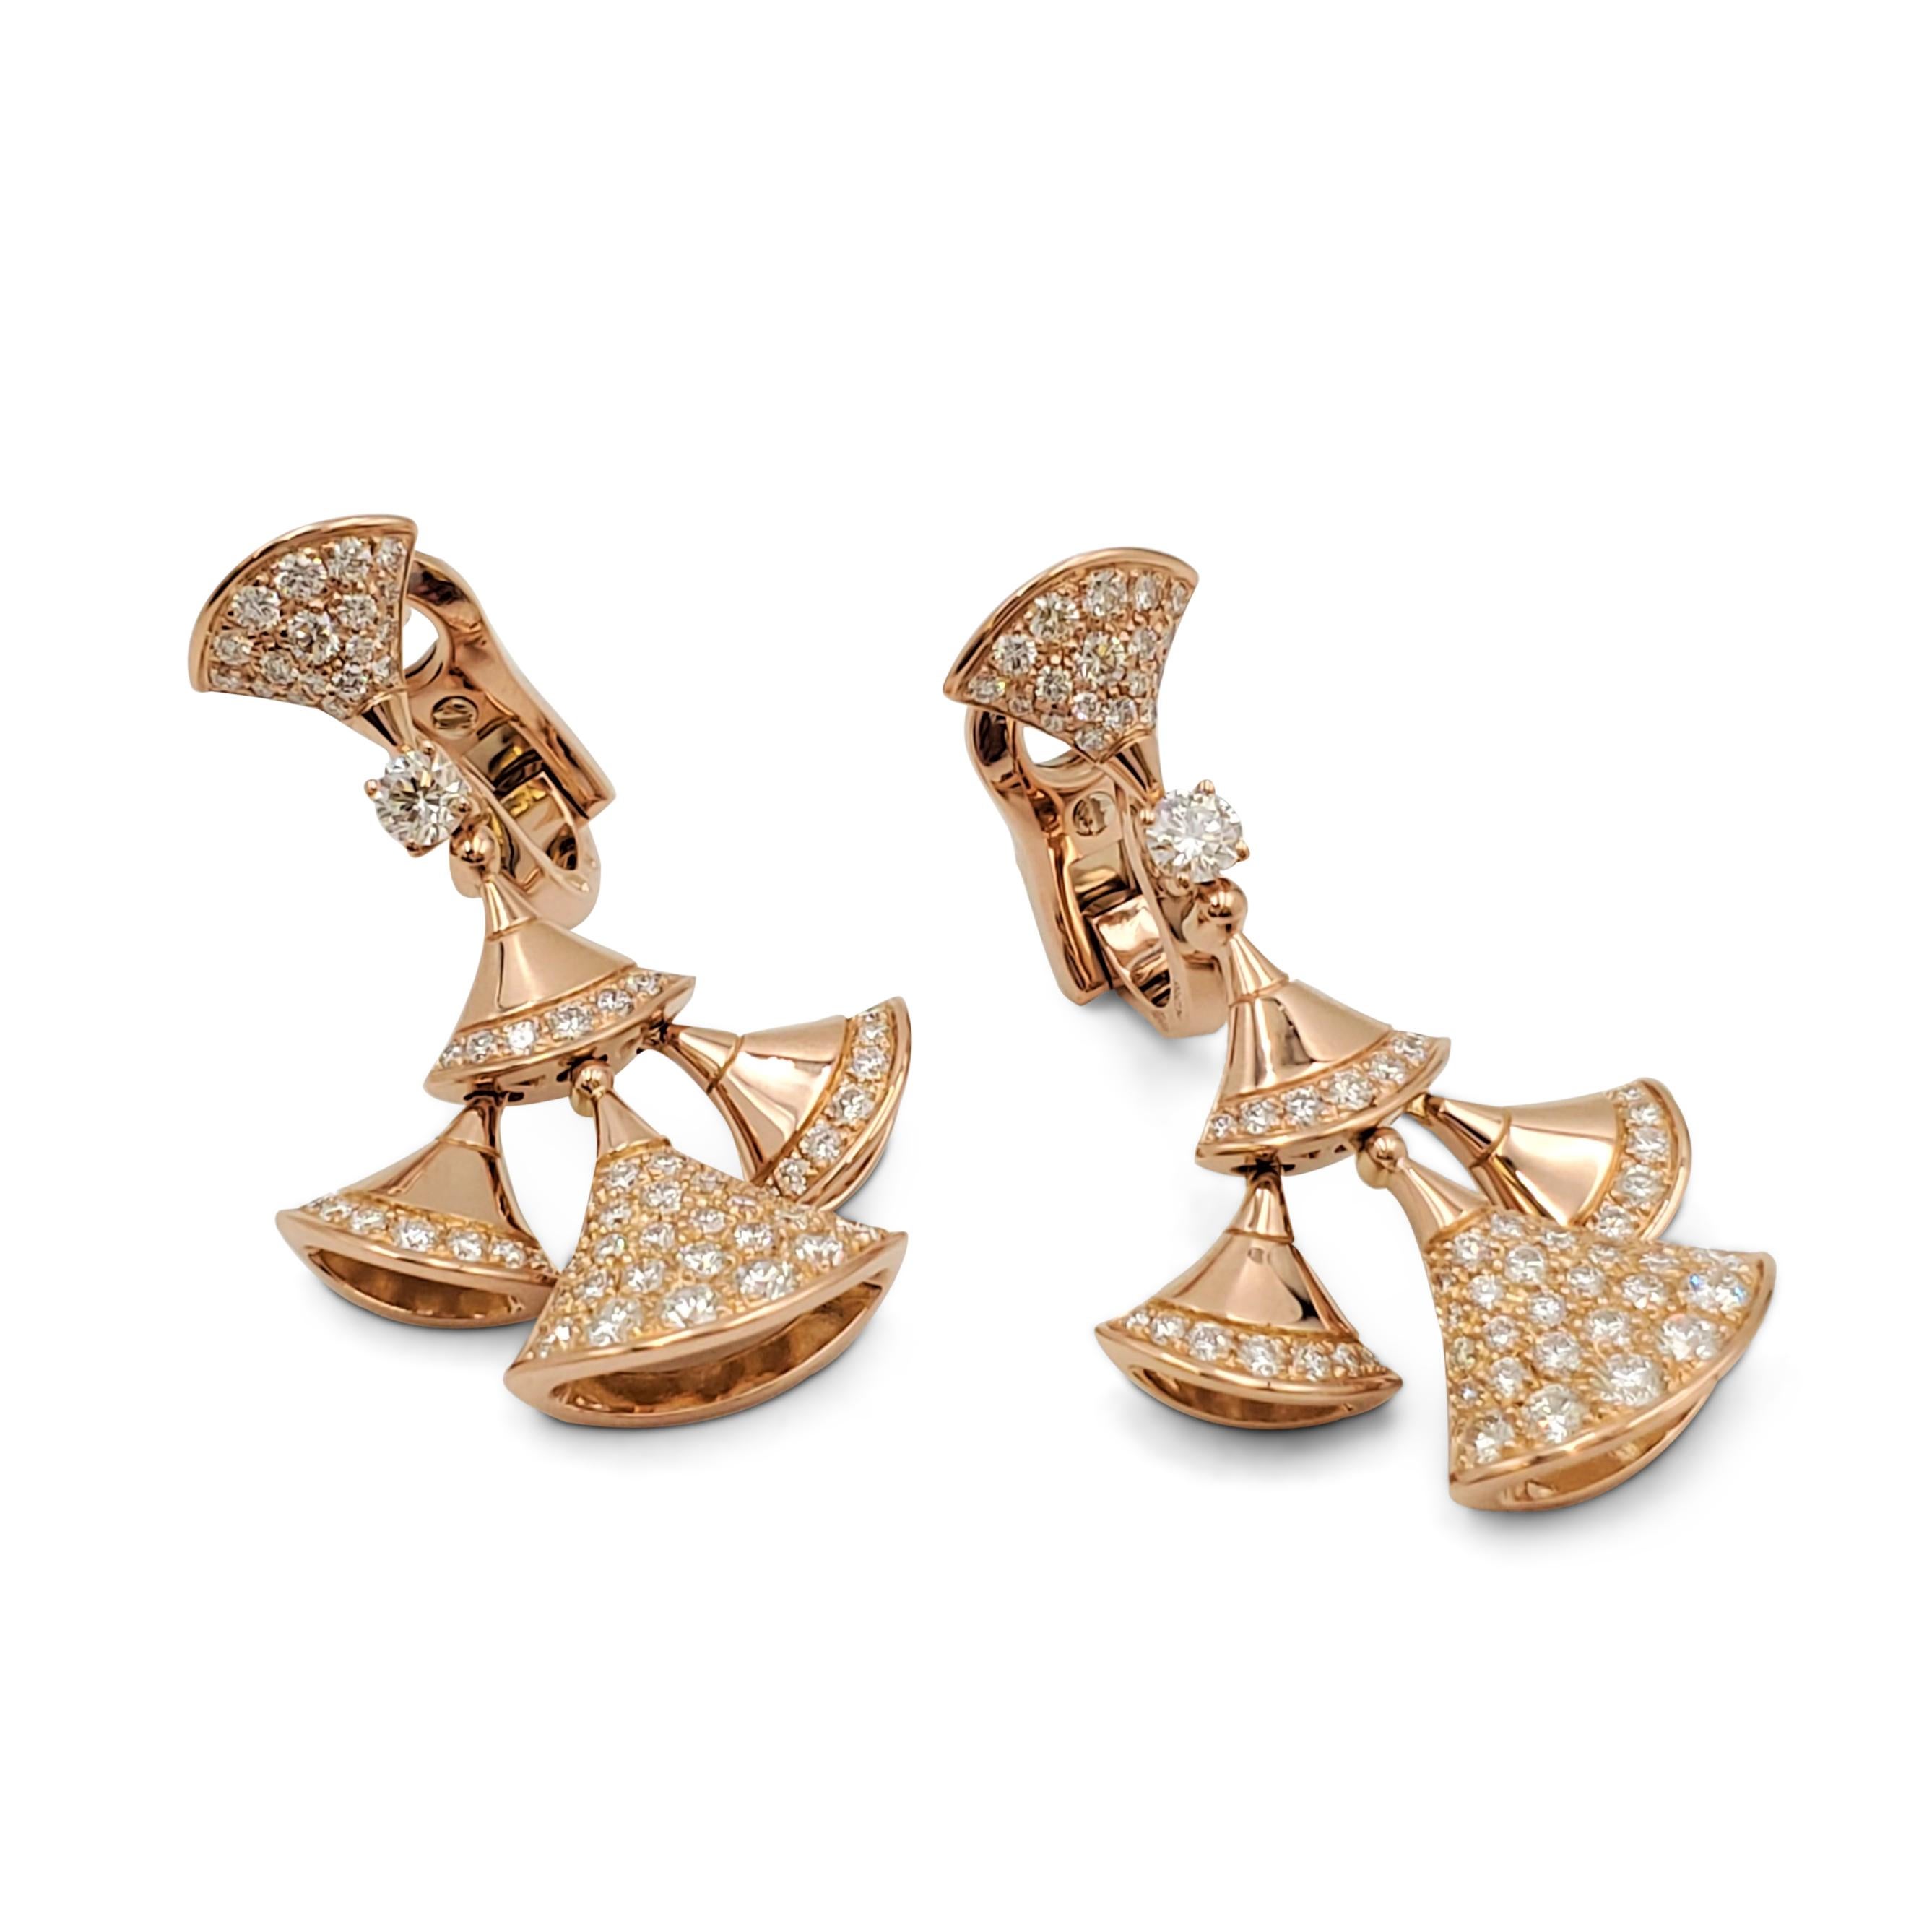 Authentic glamourous Bvlgari earrings from the 'Divas' Dream' collection center on dancing fan-shaped elements crafted in 18 karat rose gold and set with an estimated 3.45 carats of high-quality round brilliant cut diamonds (E-F, VS). Signed